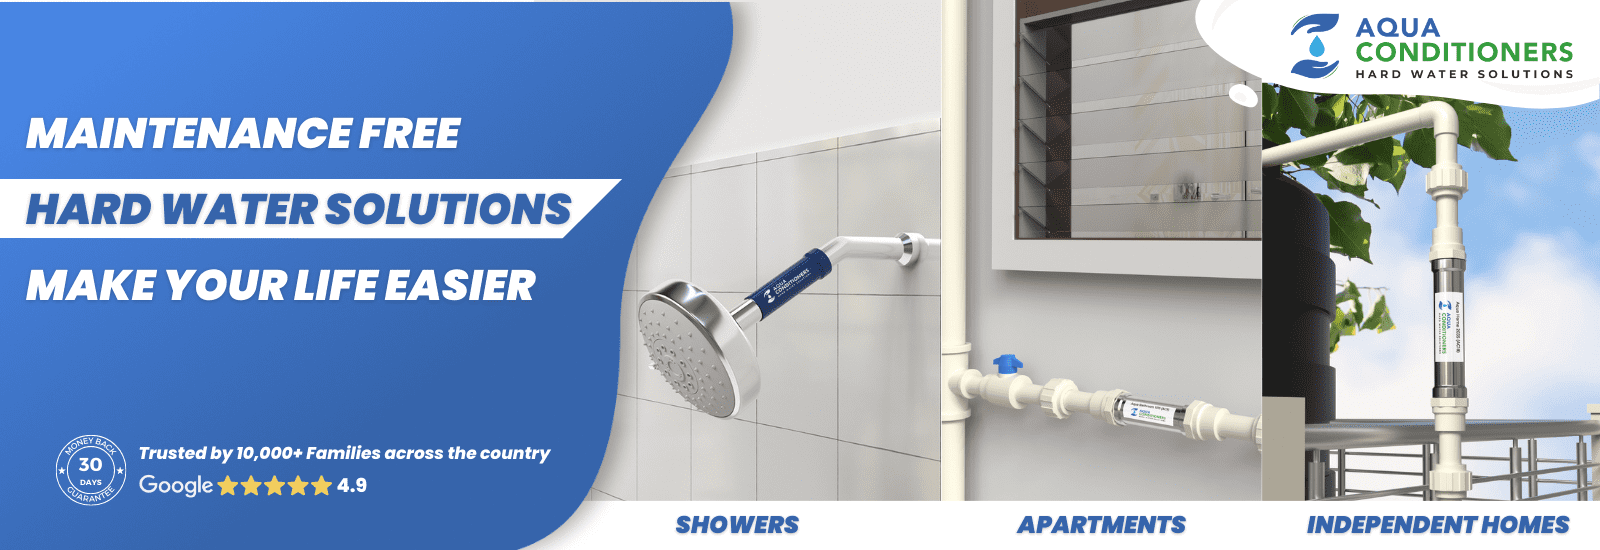 Soft Water Conditioners for Showers, Bathrooms & Independent Homes